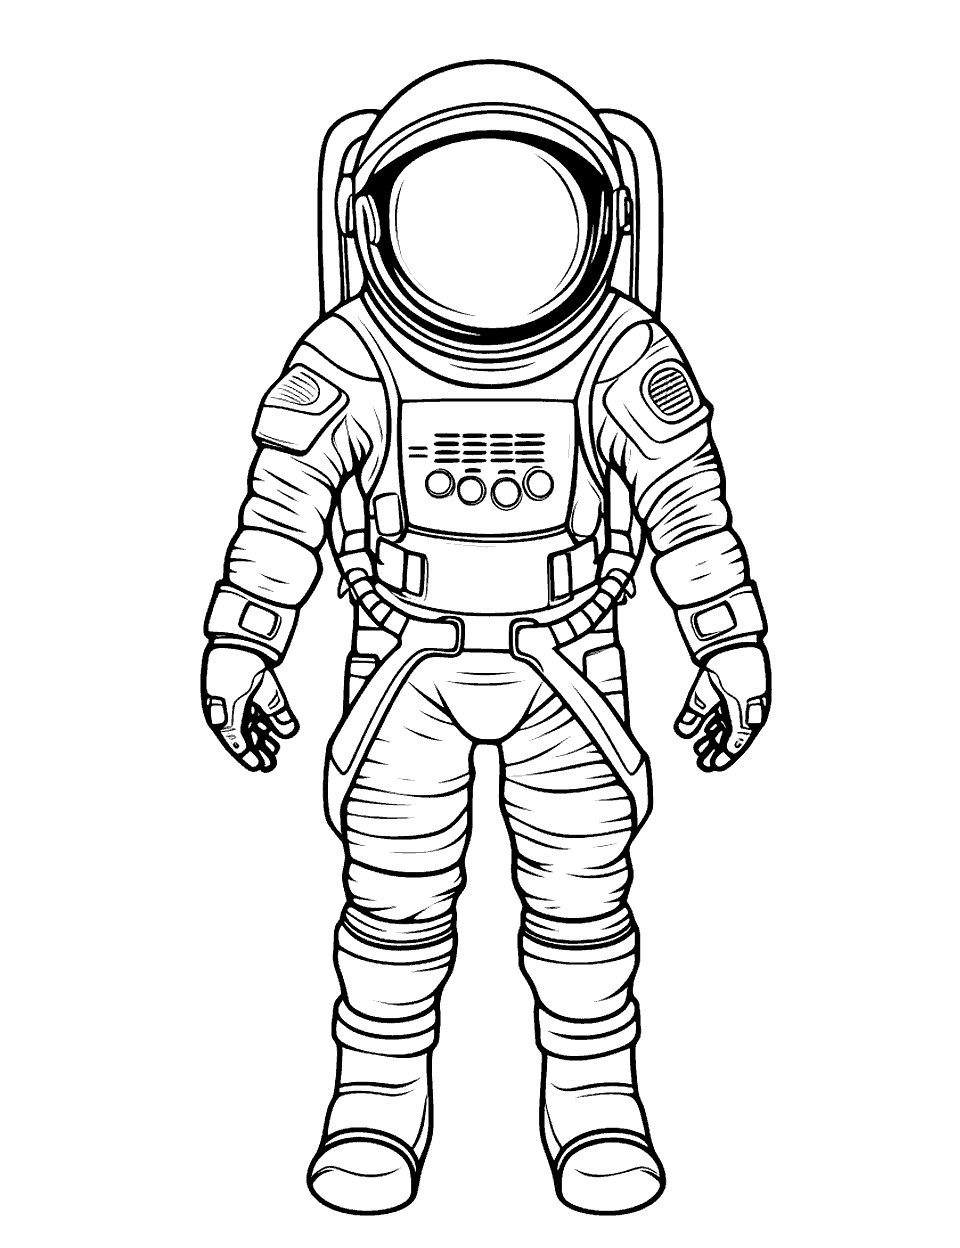 Space Suit Design Solar System Coloring Page - A detailed space suit with helmet and gloves.